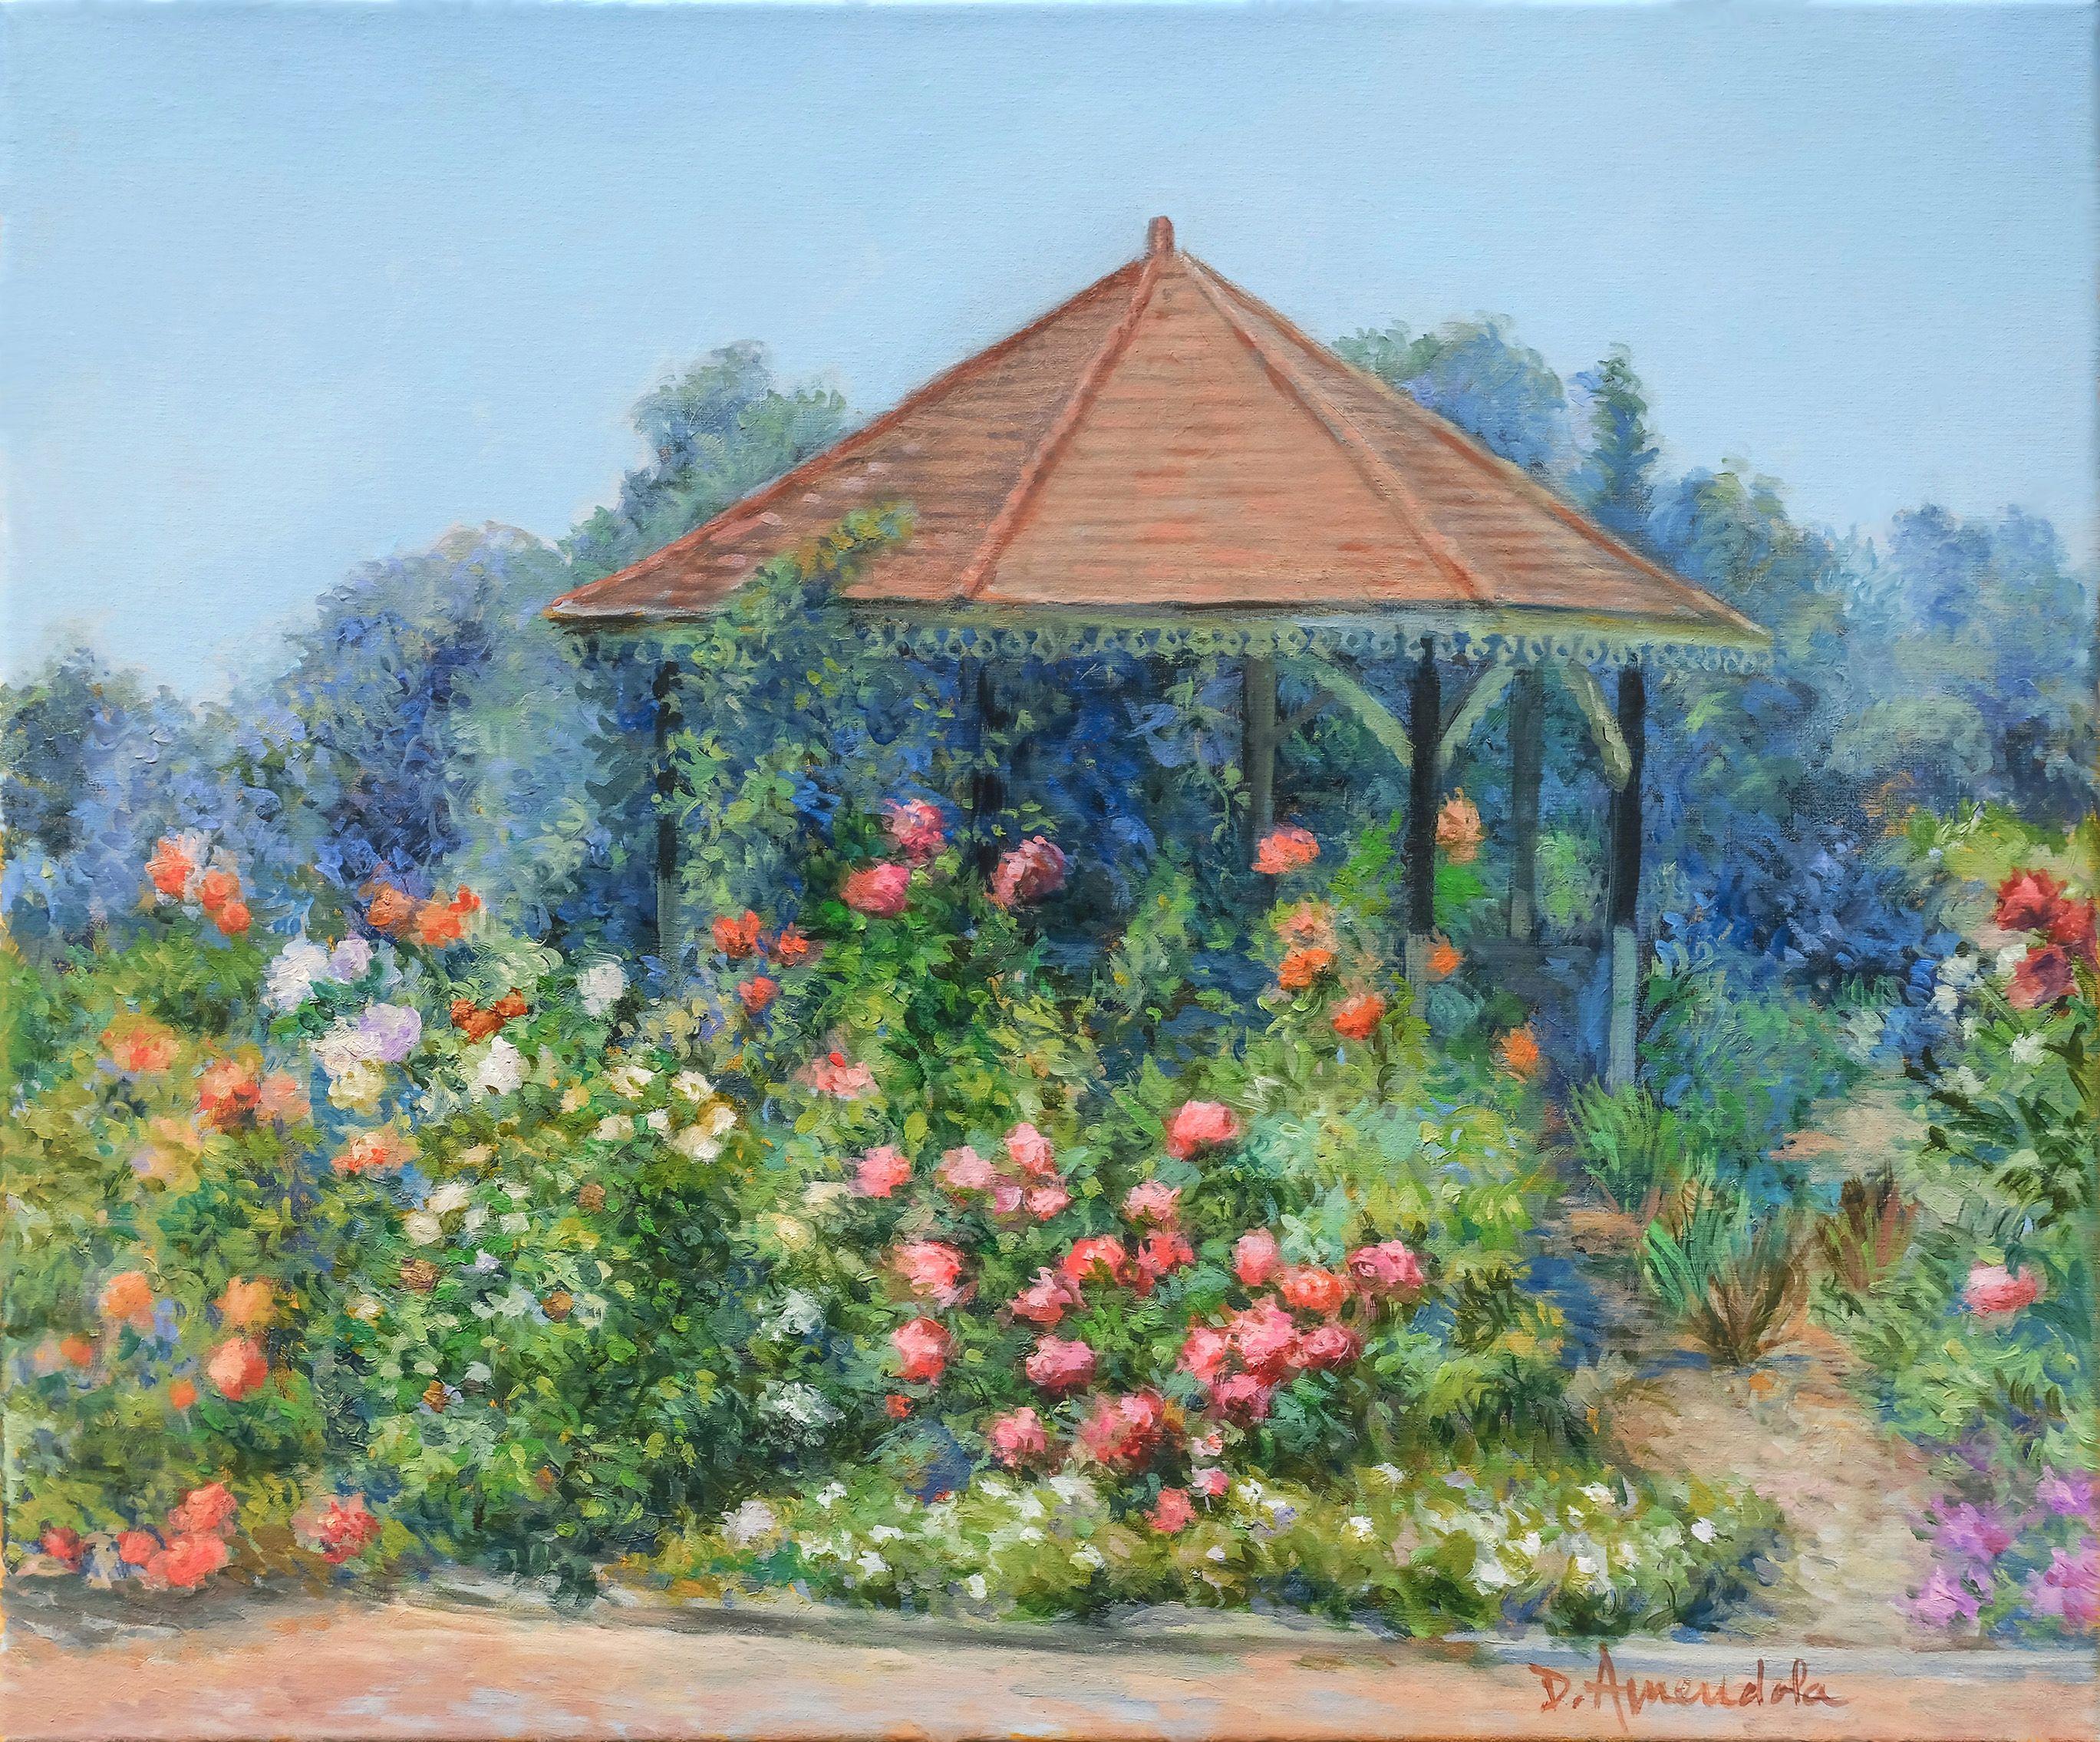 Dominique Amendola  Abstract Painting - Gazebo with flowers, Painting, Oil on Canvas